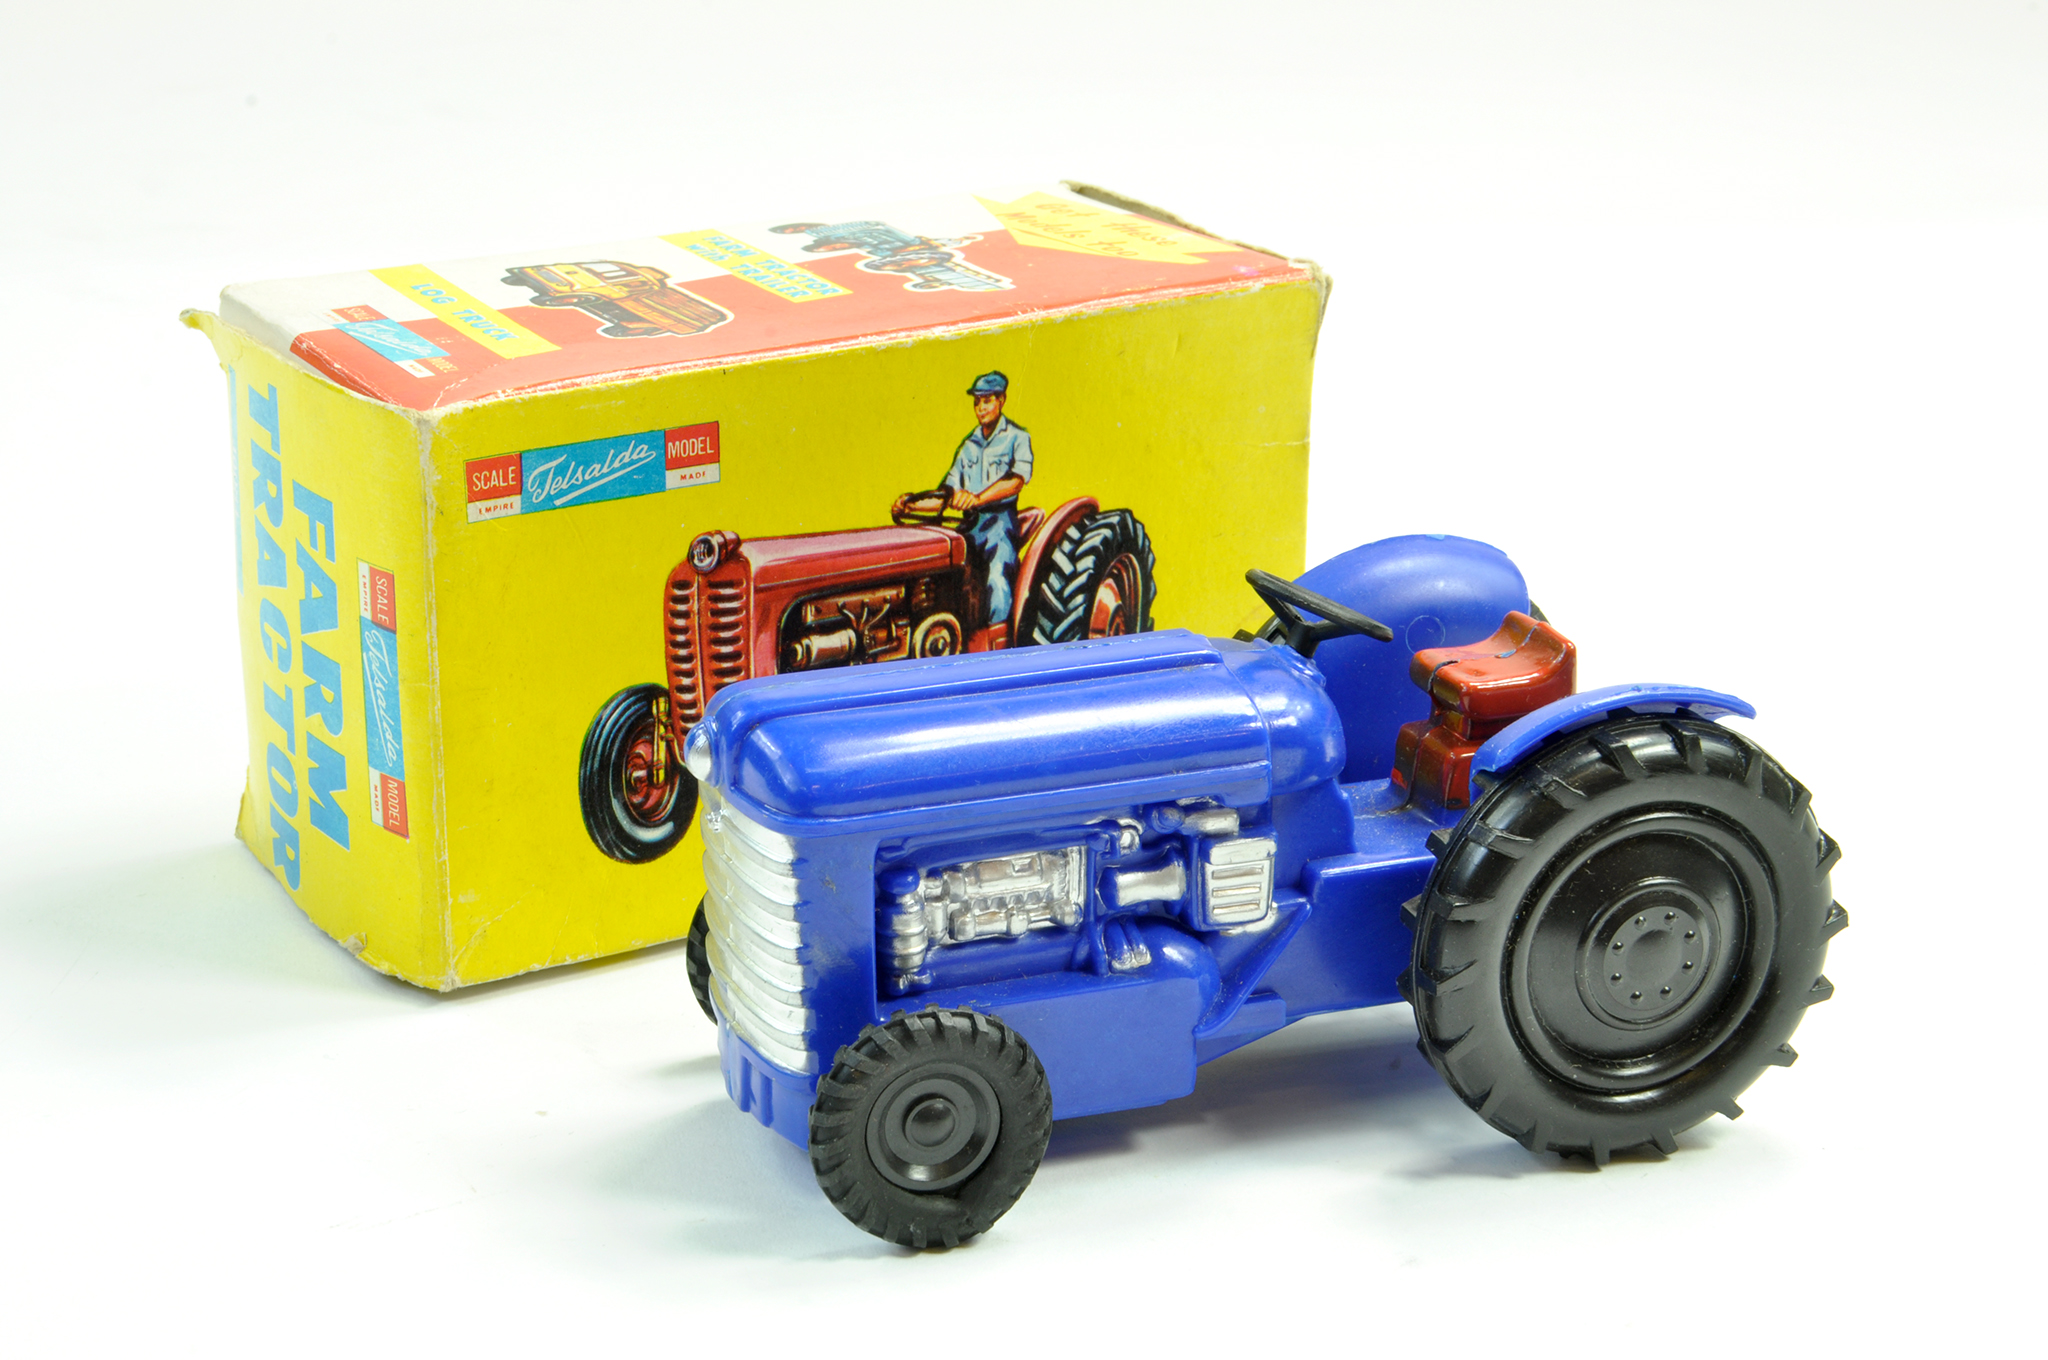 Telsalda (Hong Kong) friction driven plastic Farm Tractor in blue. Generally very good to